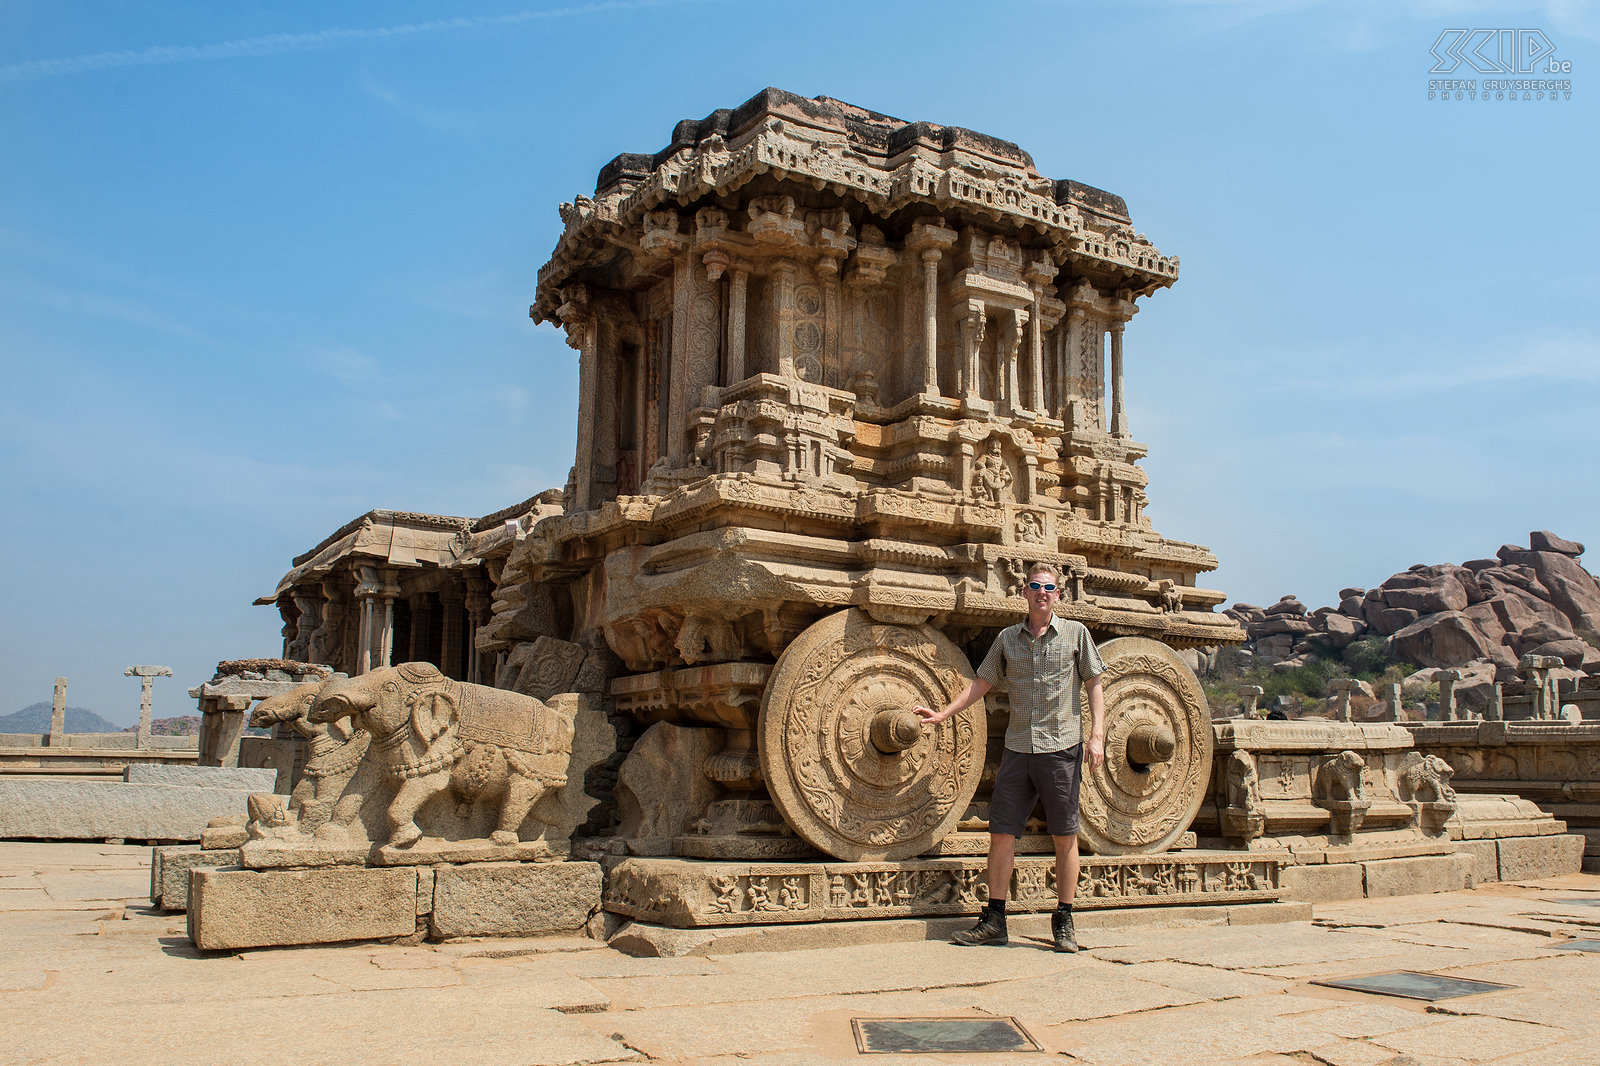 Hampi - Vittala tempel - Stefan In the center of the courtyard of the Vitalla temple there is the 'Stone Chariot', one of the most iconic sculptures in Hampi. It may look like a monolithic structure but in reality this stone shrine was built with many giant granite blocks. Currently two elephants are positioned in front of the chariot but or originally there were two horses.  Stefan Cruysberghs